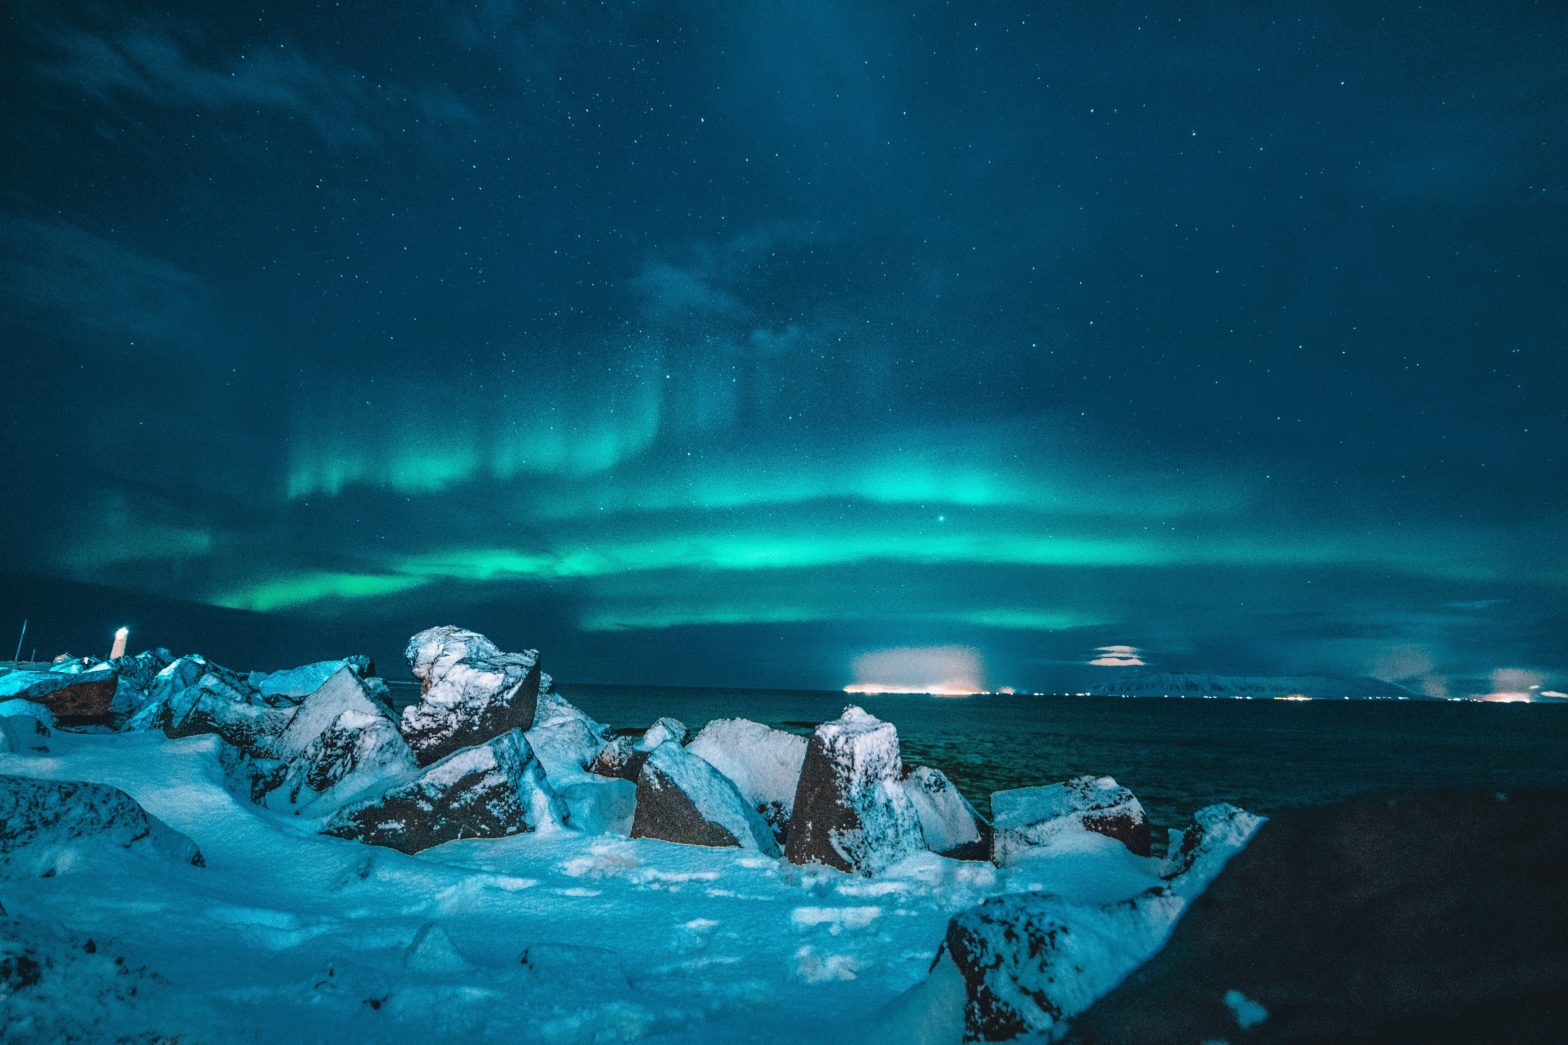 Want To See The Northern Lights? Here Are 5 Destinations To Catch This Amazing Display